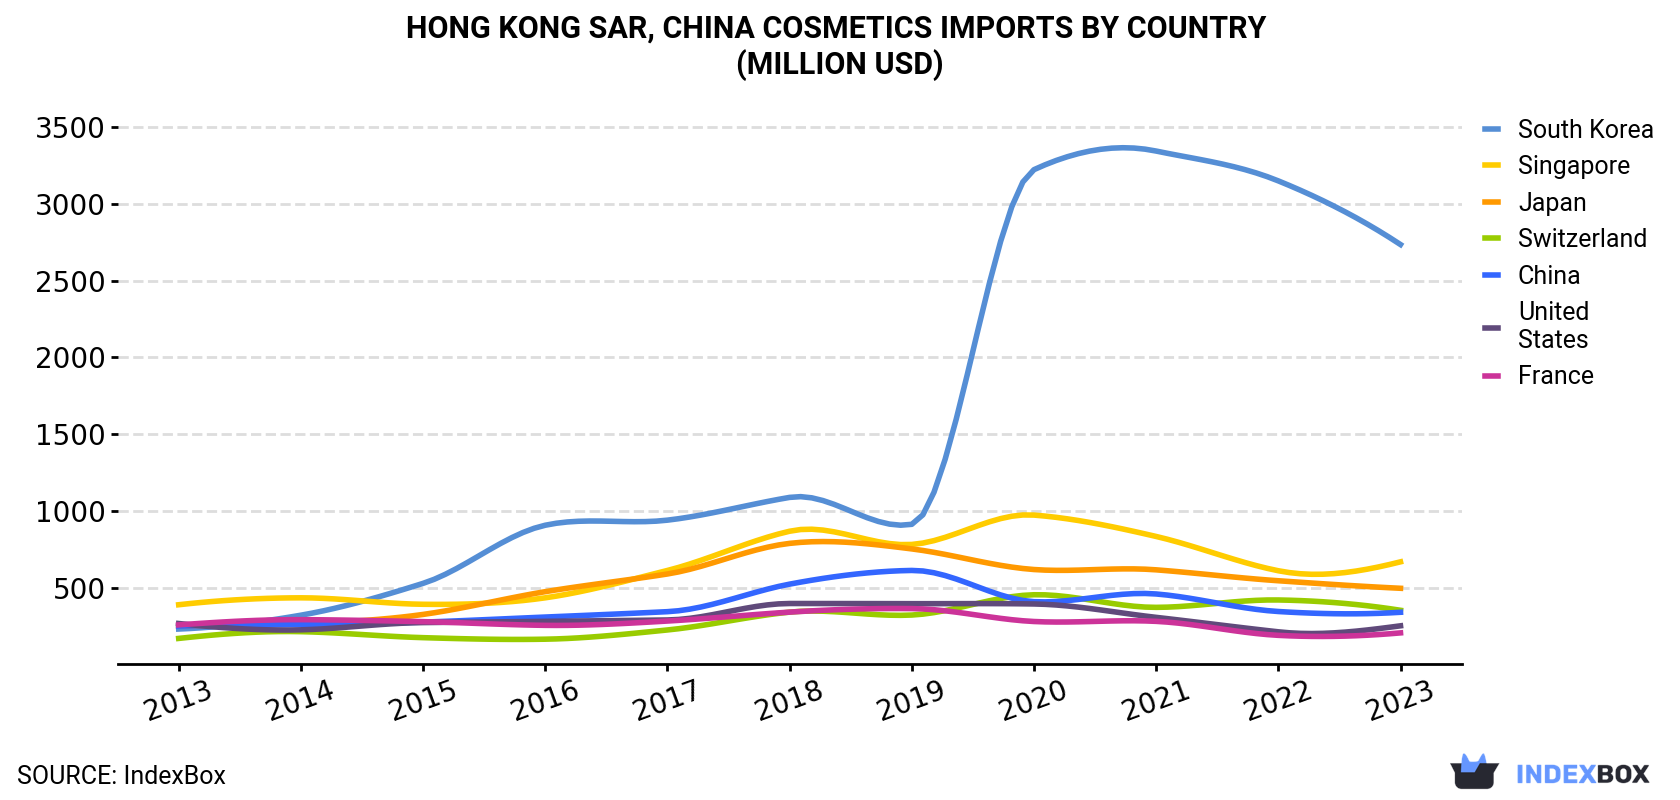 Hong Kong Cosmetics Imports By Country (Million USD)